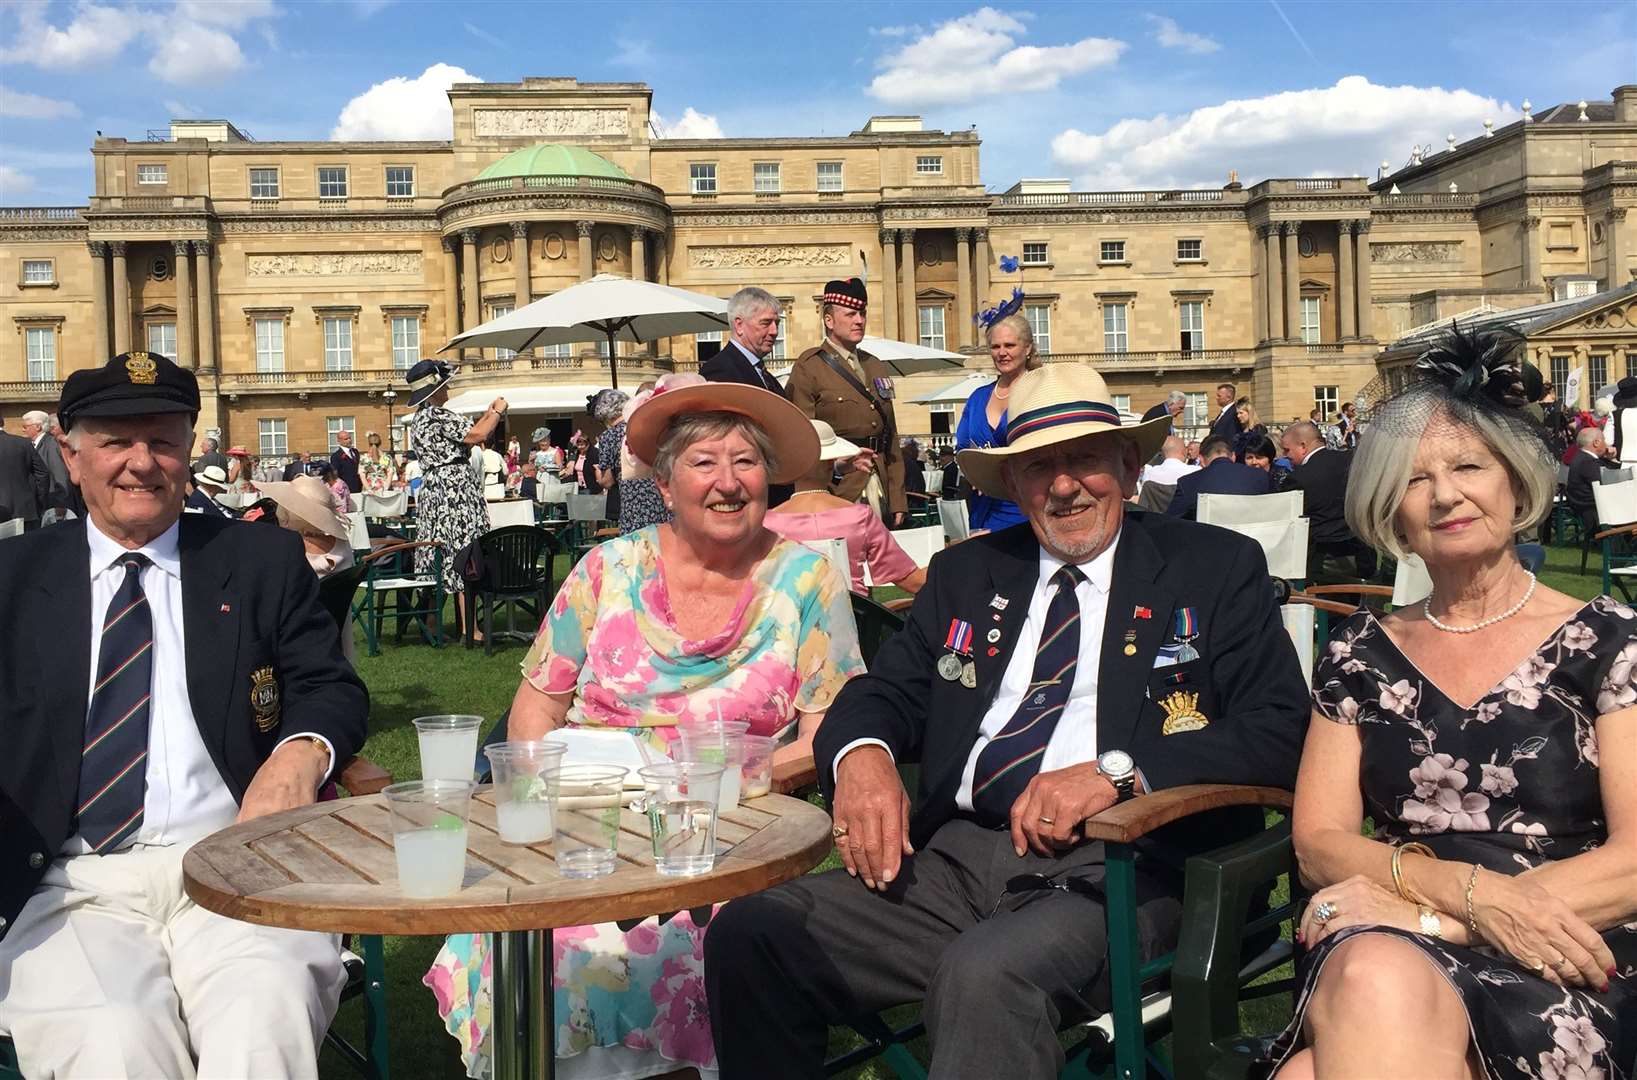 Colin Orsbourn, Doreen Dillon, Patrick Dillon, and Pat Orsbourn, of the Gravesend Merchant Navy at The Not Forgotten Association Garden Party Tea on Thursday May 23 at Buckingham Palace